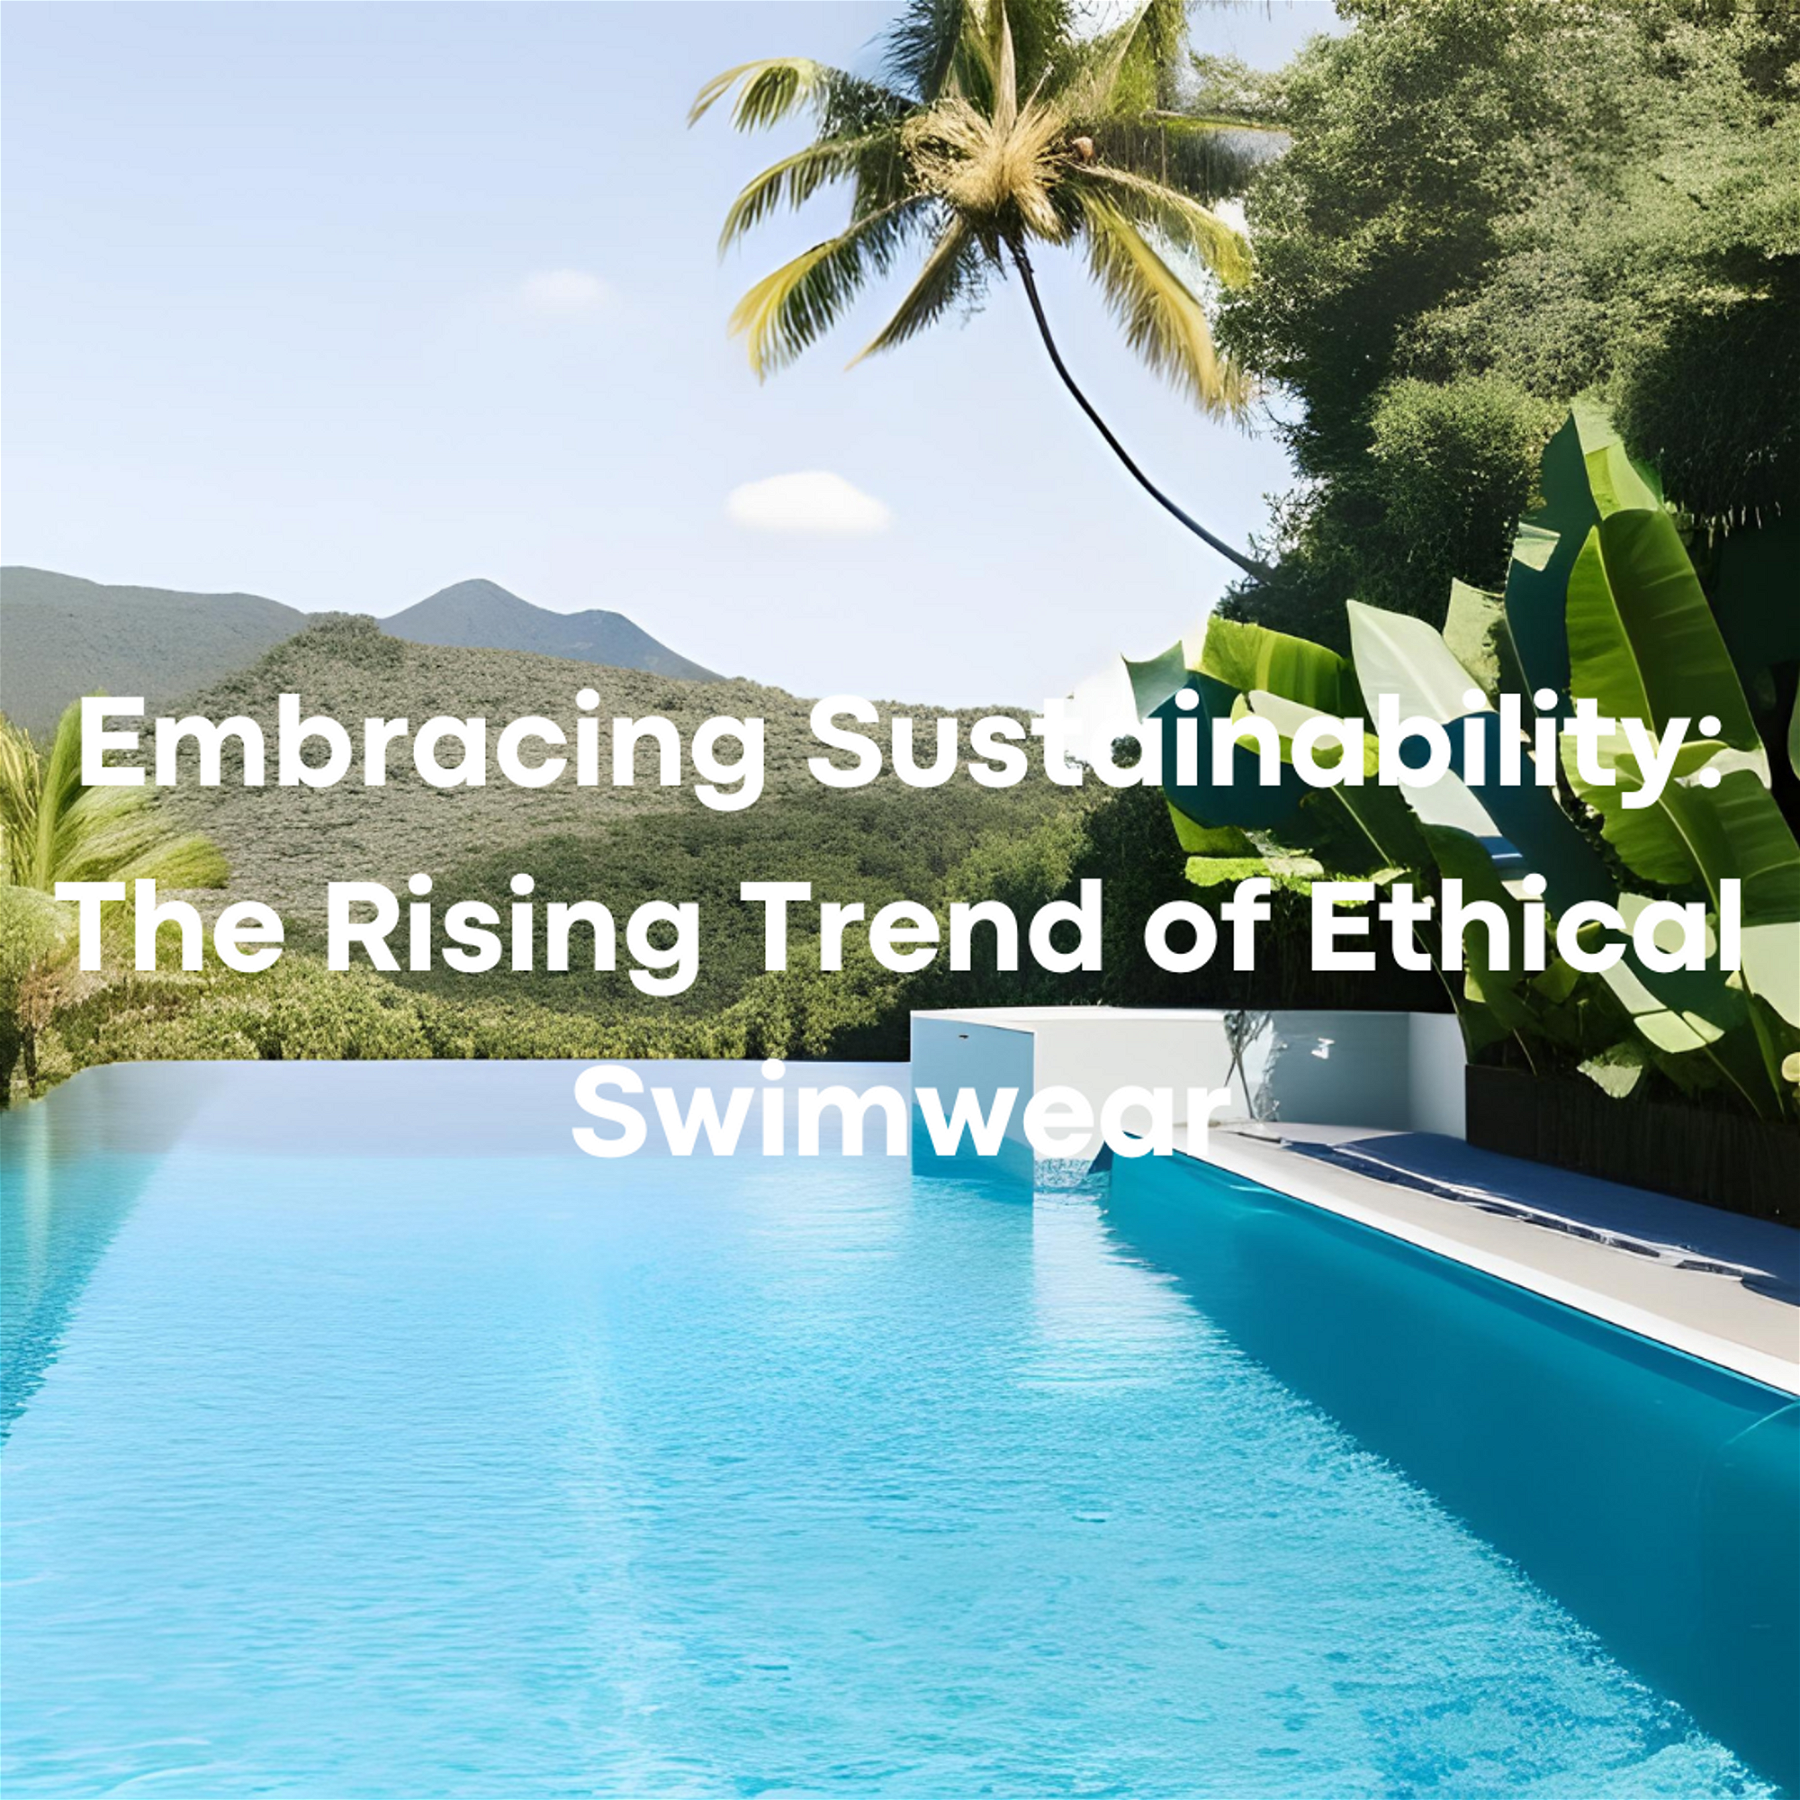 Embracing Sustainability: The Rising Trend of Ethical Swimwear